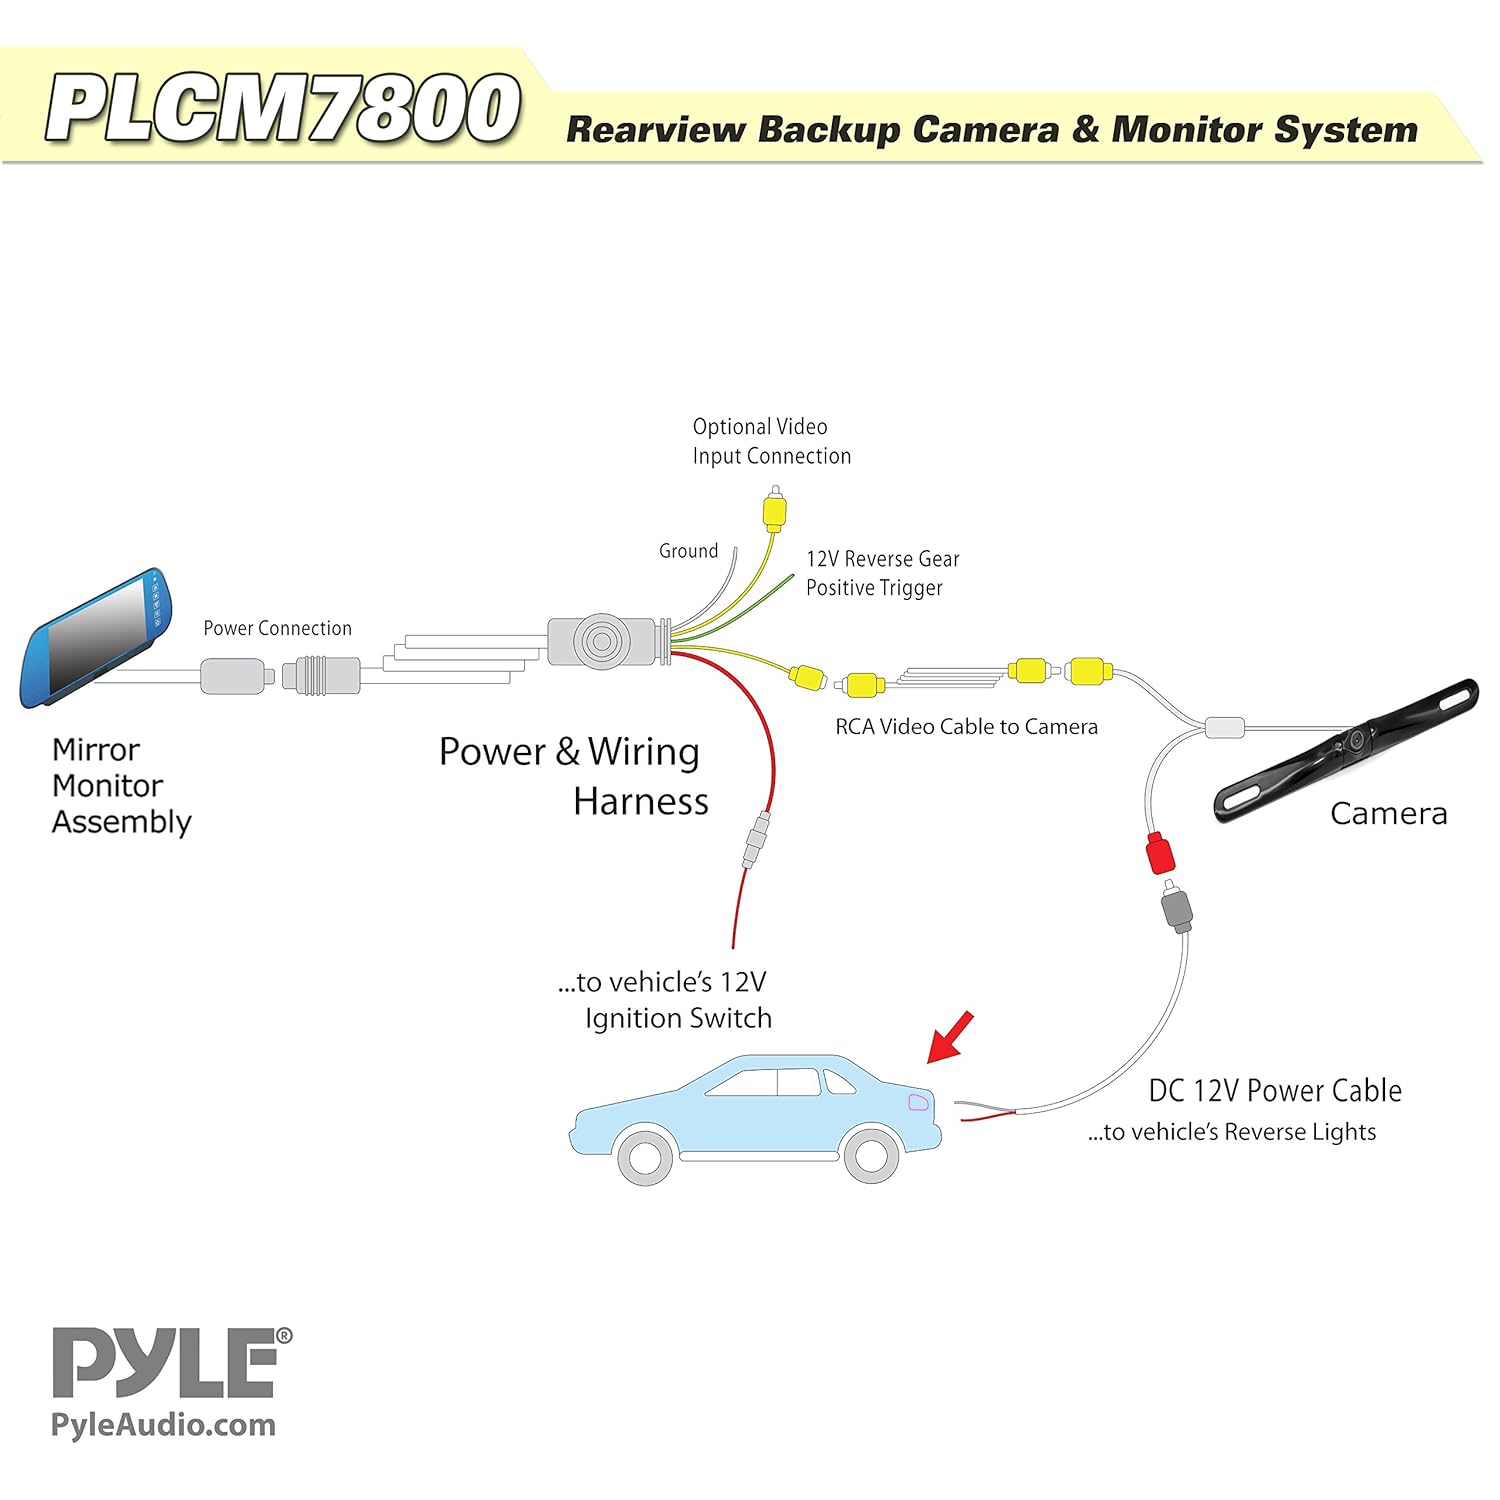 Reverse Camera Gm Backup Camera Wiring Diagram from schematron.org